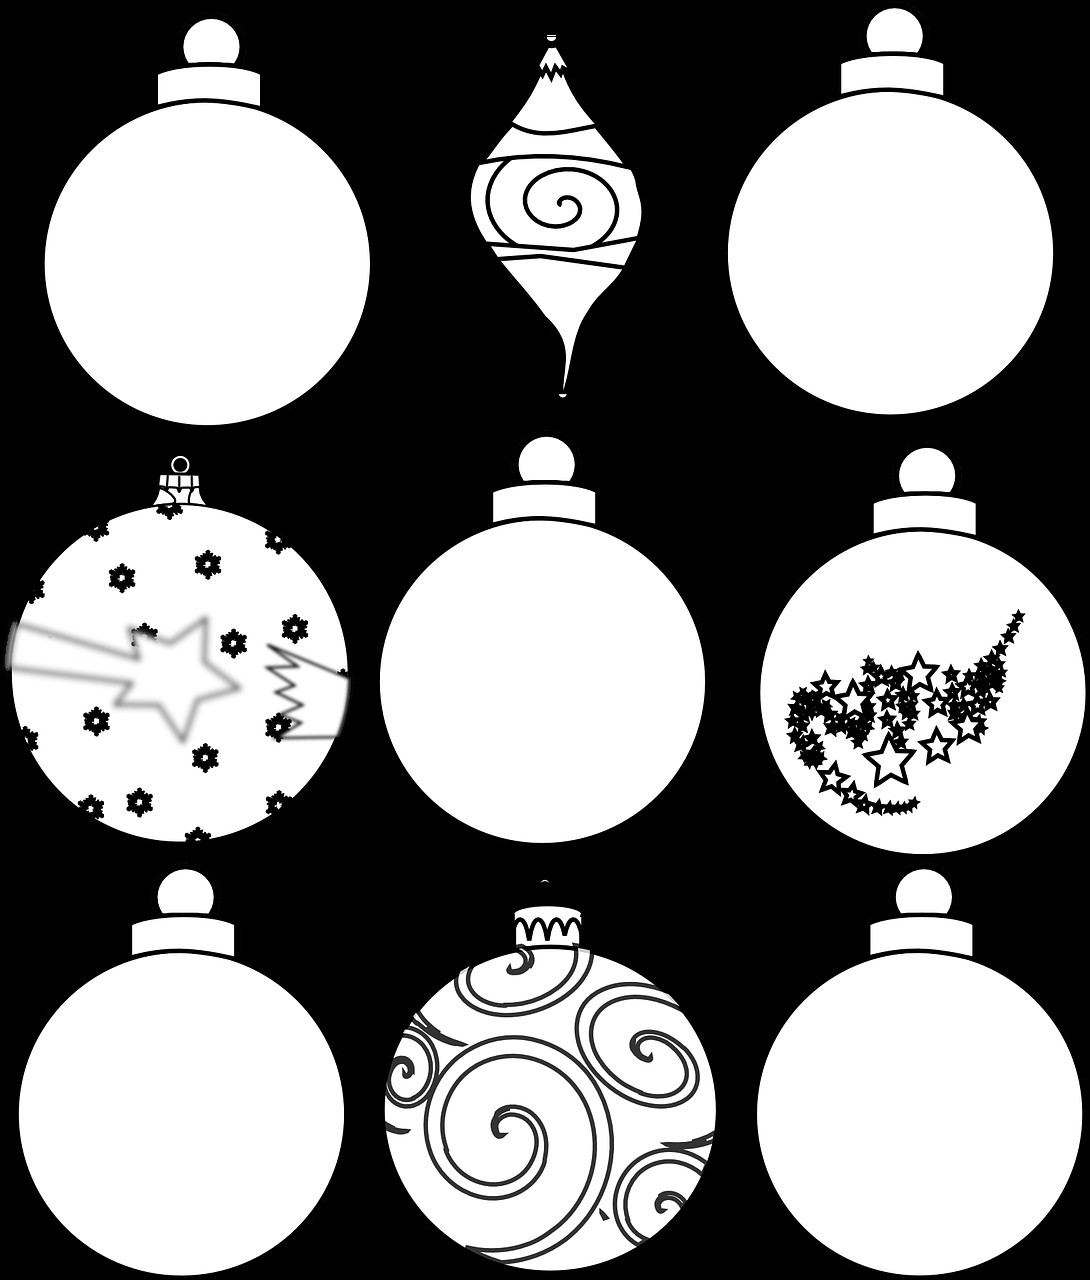 Christmas Ornaments Coloring Pages Printable
 Colour and Design your own Christmas Ornaments Printables